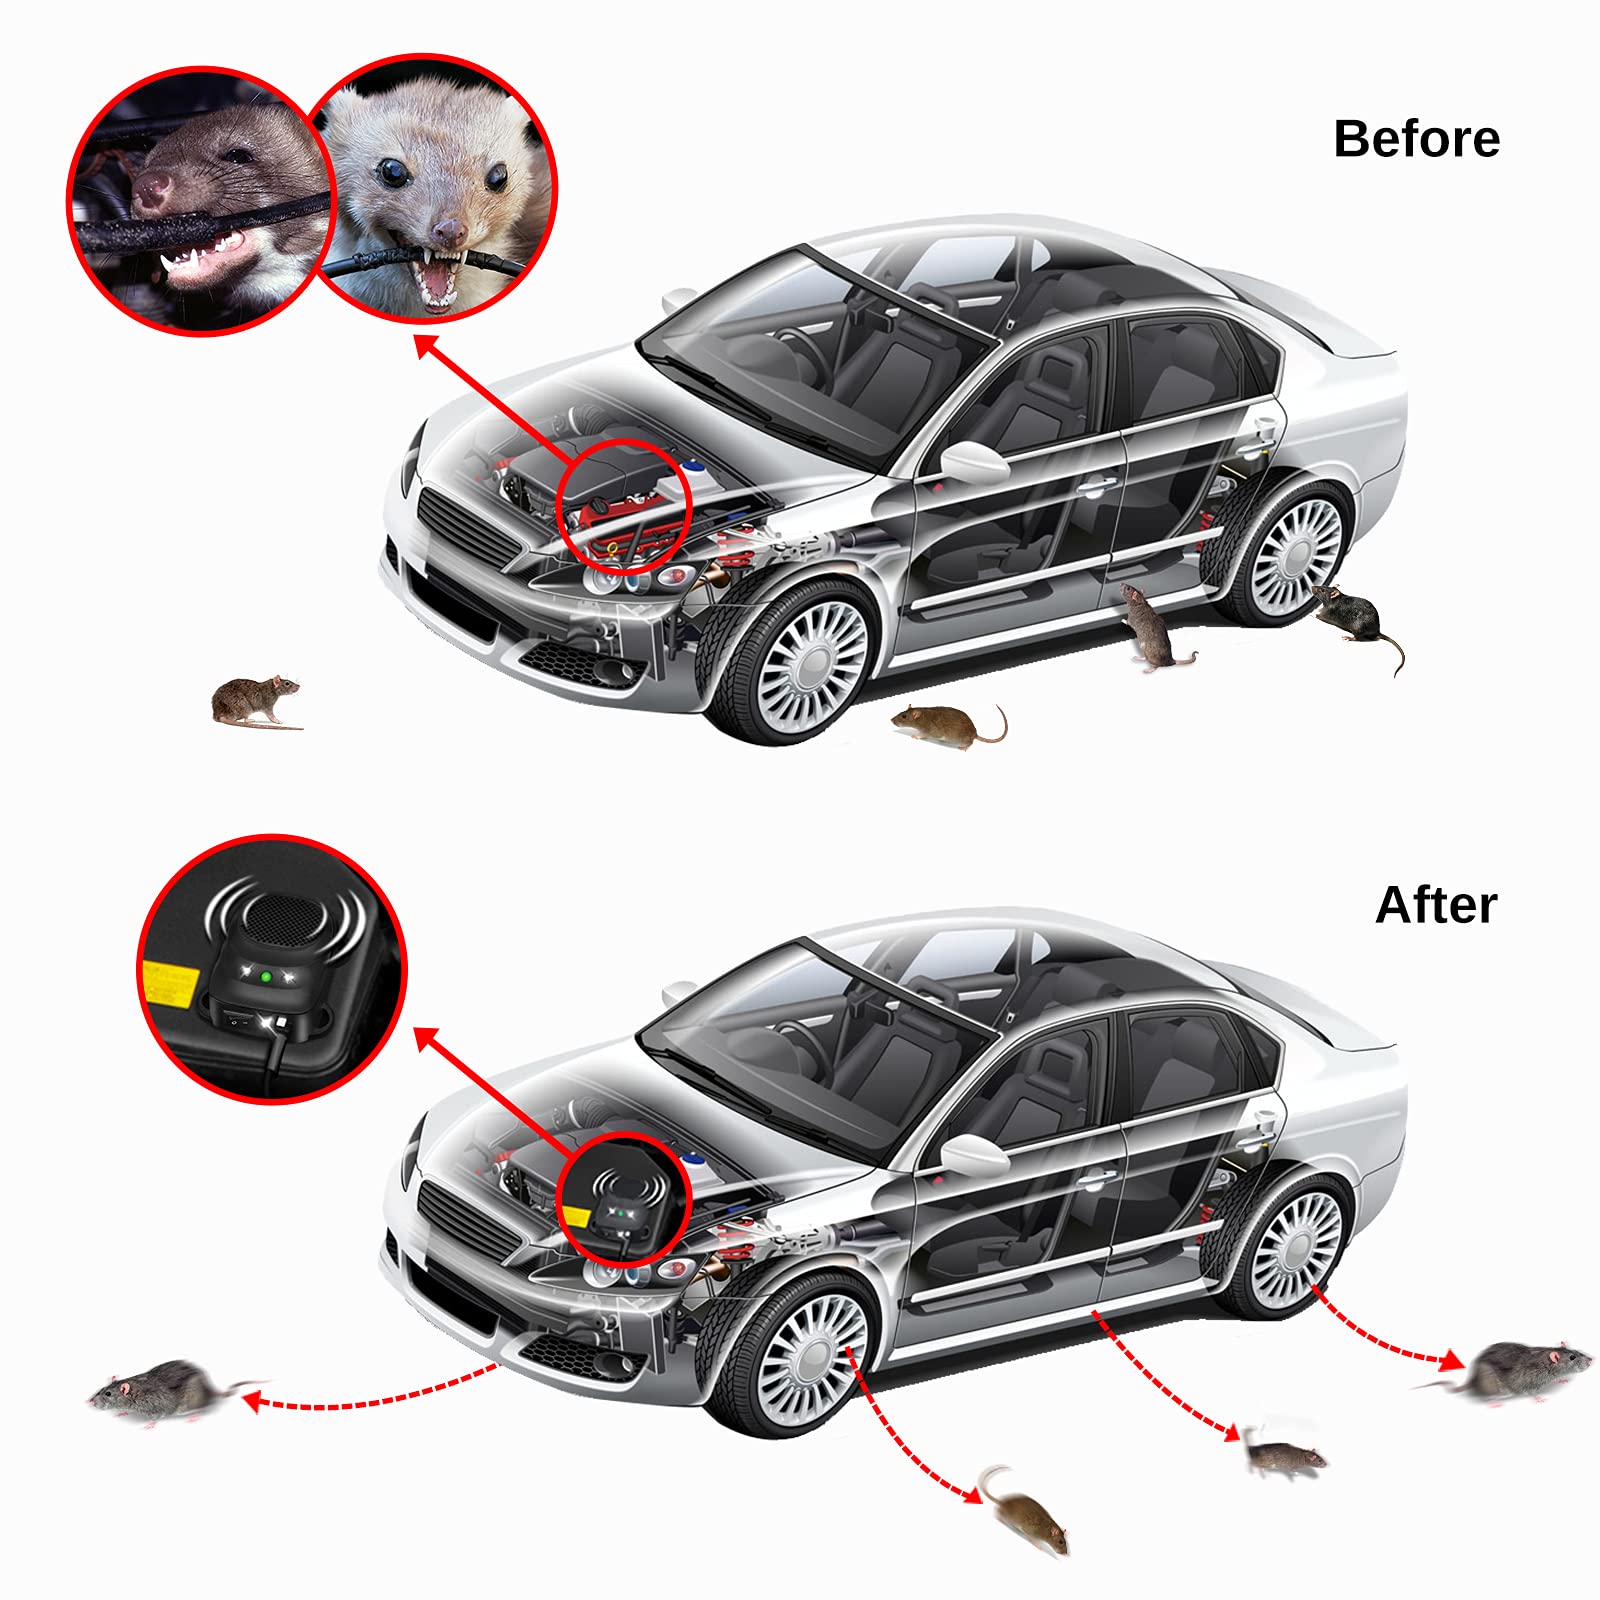 Loraffe Ultrasonic Rodent Repellers Bundle, 12V Under Hood Animal Repellers, Plug in Rodent Repeller for Indoor Use, Vehicle and Garage Rodent Defense Pest Control